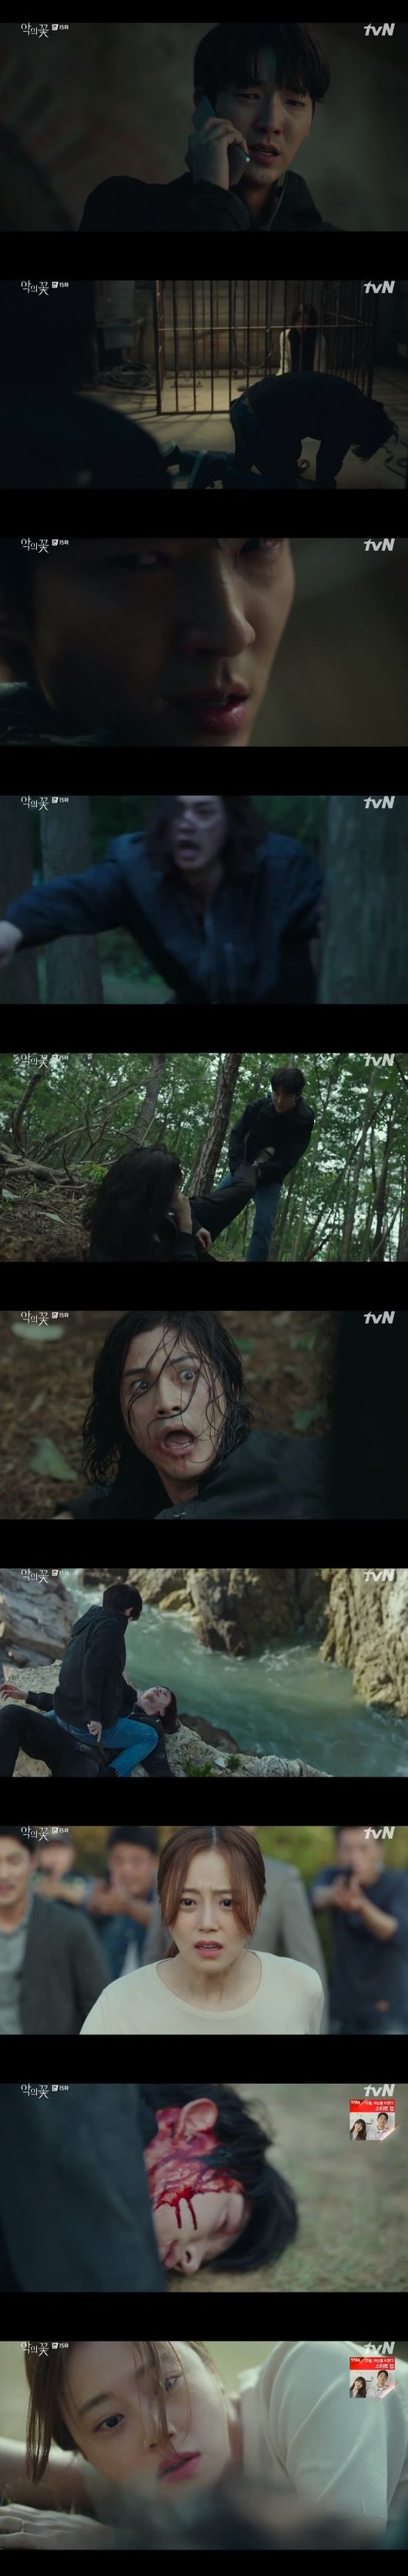 Lee Joon-gi was shot and knocked down by Kim Ji-hoon.In the TVN tree drama The Flower of Evil, which was broadcast on the 17th, Do Hyun-soo (Lee Joon-gi) was shot and collapsed.On this day, Baek Hee-Seong (Kim Ji-hoon) visited Cha JiWons house and stabbed Do Hae-su (Jang Hee-jin) with a knife, thinking that Cha JiWon. At that time, Do Hyun-soo met Yeom Sang-chul (Kim Ki-du) and asked who was the accomplice, and Yeom Sang-chul said, If you betray me right now, I will not. I will be on your side. Kim Moo-jin (Seo Hyun-woo) visited Dohaesu and was surprised to see the fallen Dohaesu, bleeding, saying, If you do not come, it is not between you.On the other hand, Do Hyun-soo visited where Jung Mi-sook (Han Soo-yeon) was trapped and told Jung Mi-sook, The accomplice in the murder case is targeting you.And Im going to get him, he said.There is only one thing, and unless you open this door yourself, no one can open it. Jung Mi-sook is safe, he said.However, Jung Mi-sook did not believe in Do Hyun-soo, who was trying to help him. Do Hyun-soo said, I think he wants to help me because he is in a similar situation to Jung Mi-sook.I do not know why I should be doing this. I am in the situation now. Jung Mi-sook finally grabbed the key.Choi Jae-seop (Choi Young-joon) said, The time of death is a little strange while investigating the behavior of Park Soon-young, a housekeeper (Nam Ki-ae).In response, Arata Iura Chul (Choi Dae-hoon) said, The rigid time may change at any rate; I need to meet a delivery person myself; the investigation is poor.Cha JiWon (Moon Chae-won) found the black box of the criminal who called Do Hyun-soo, and Detectives said, I think I called you from a place without CCTV. Why did not I think of the black box?I would have known it, he questioned.Cha JiWon was then told that the house was stolen and that the back was dangerous and headed straight home. Fortunately, the back was safe thanks to the sea.Detectives confirmed CCTV that the person who was looking for Cha JiWon was the one who called Do Hyun-soo.Lim Ho-joon (Kim Soo-oh) contacted Cha JiWon and said, Sir, you should not be alive today and spread to the media that Cha JiWon was dead.This article was smiled at by Baek Hee-seong, who said: He was trying to kill me, but he doesnt know my face.Its weird, said Arata Iurachul, who said if the killer is two people.Baek Hee-seong visited Yeom Sang-cheol and looked at Jung Mi-sook, who was trapped, and said, I did not remember that 15 years ago ... now I think you are remembering.Then he handed 500 million won to Yeom Sang-cheol, who counted the bills and tasted the money and inhaled the powerful rat poison sprayed by Baek Hee-seong.I do not know this fact, and he said, Lets not see it again.When Yeom Sang-cheol left, Baek Hee-seong told Jung Mi-sook, Do we always meet like this? No matter how much he escapes, he can not escape.This is your destiny, he said with an eerie smile.On the other hand, Choi Jae-seop, who was investigating Park Soon-young, said from the delivery man, He is not deaf.I did not knock the bell at that time, and confirmed that the tofu from Park Soon-young was at lunch, not dinner.Choi immediately informed his colleagues that he was trying to hide the criminal. Mom. I did not care because there was no black box 15 years ago.Baek Hee-seong woke up, he said, alarming.Do Hyun-soo was watching him behind the Baek Hee-seong and attacked him from behind when Do Hyun-soo tried to get out of Jung Mi-sook.Do Hyun-soo told Baek Hee-seong: Dont try too hard, you cant have any impact on me.Give me a phone that I contacted with Sang-cheol. Do Hyun-soo took out the phone and checked the bloody Cha JiWon nameplate.Baek Hee-seong said, I like the house. Whose boat is behind the TV? I like it.I did not touch the child, he said, and Do Hyun-soo called Cha JiWon in tears, but Cha JiWon did not answer the phone because he did not know the number.The police officer inquired and said the victim was killed at DJ Maphorisa Police Station.I am going to win unconditionally, said Baek Hee-seong, who saw this.Even if you hand me over to the police station... even if I die for you... you can never win. So, Do Hyun-soo approached Baek Hee-seong with a knife and said, I will kill you and kill you. However, Baek Hee-seong ran away after walking Do Hyun-soo.Do Hyun-soo followed the fleeing Baek Hee-seong and stabbed his thigh and arm, and Baek Hee-seong led his injured body to the cliff, and Do Hyun-soo pointed the knife after overpowering Baek Hee-seong.At that time, Cha JiWon heard that a phone call came from DJ Maphorisa Police Station wondering about his death, and Cha JiWon, who confirmed that Do Hyun-soo called, called straight away.Cha JiWons phone call was received by Jung Mi-sook and cried, Please get Do Hyun-soo. Jung Mi-sook came out of his own key given by Do Hyun-soo.Cha JiWon ran straight to the scene, Cha JiWon found Do Hyun-soo pointing a knife at Baek Hee-seong, and Baek Hee-seong looked at Cha JiWon in front of him and said, Cha JiWon is right.I said you were dead. At that time, Do Hyun-soo was confused and confused again.Cha JiWon, who watched this, persuaded him, Its over, you only have to come this way. But Do Hyun-soo cried, I can not believe you.Then Cha JiWon shouted, You can hug me. Do Hyun-soo put down the knife and gave it to Cha JiWon.At that moment, Baek Hee-Seong shot at the two and fell down when Do Hyun-soo was shot in the head.broadcast screen capture